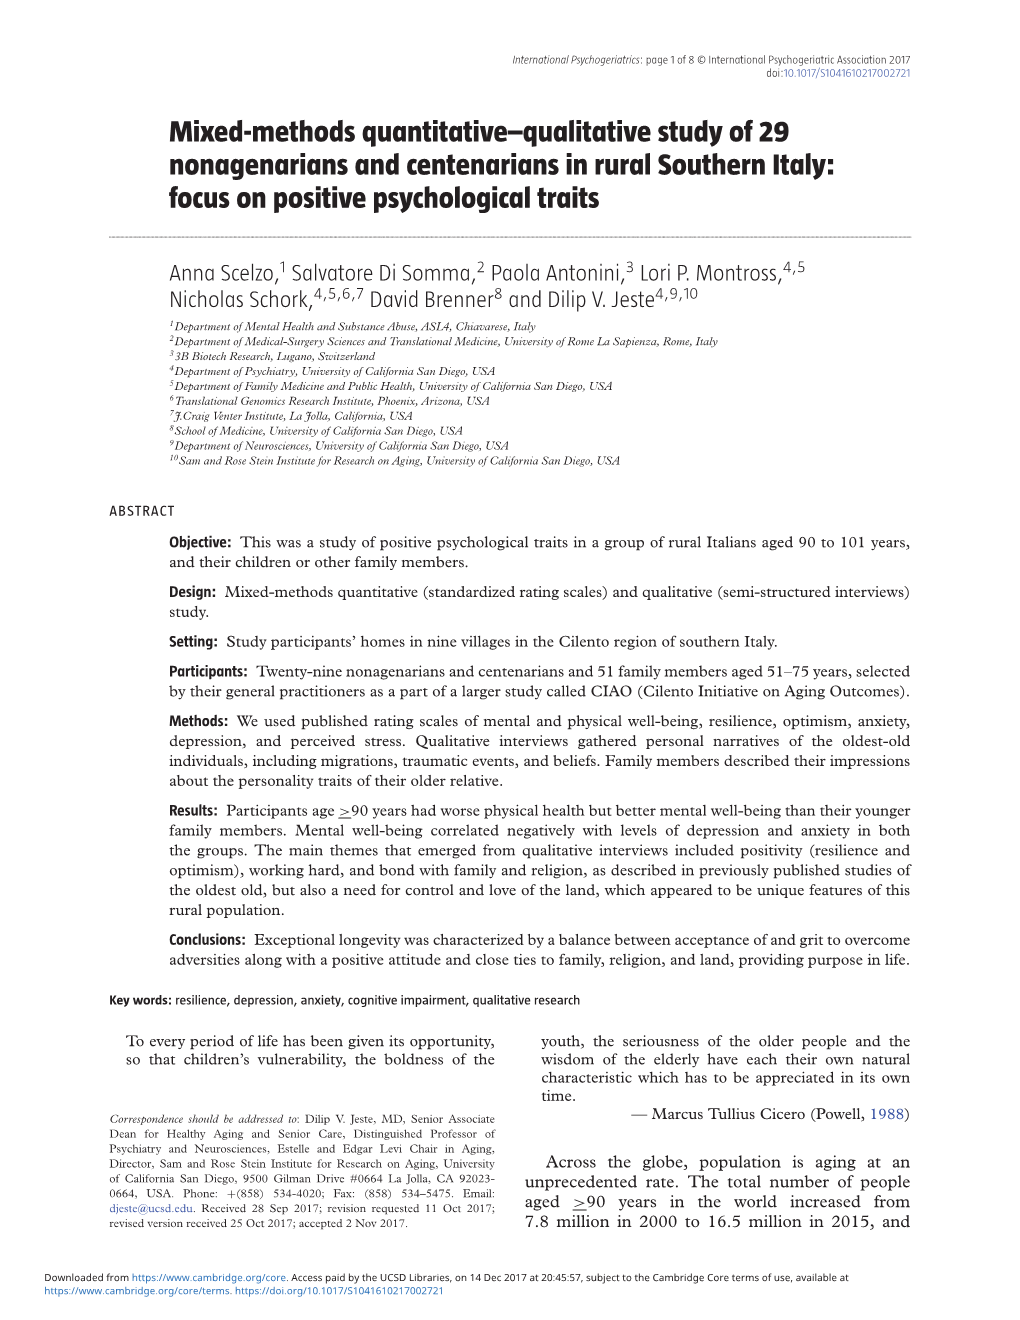 Mixed-Methods Quantitative–Qualitative Study of 29 Nonagenarians and Centenarians in Rural Southern Italy: Focus on Positive Psychological Traits